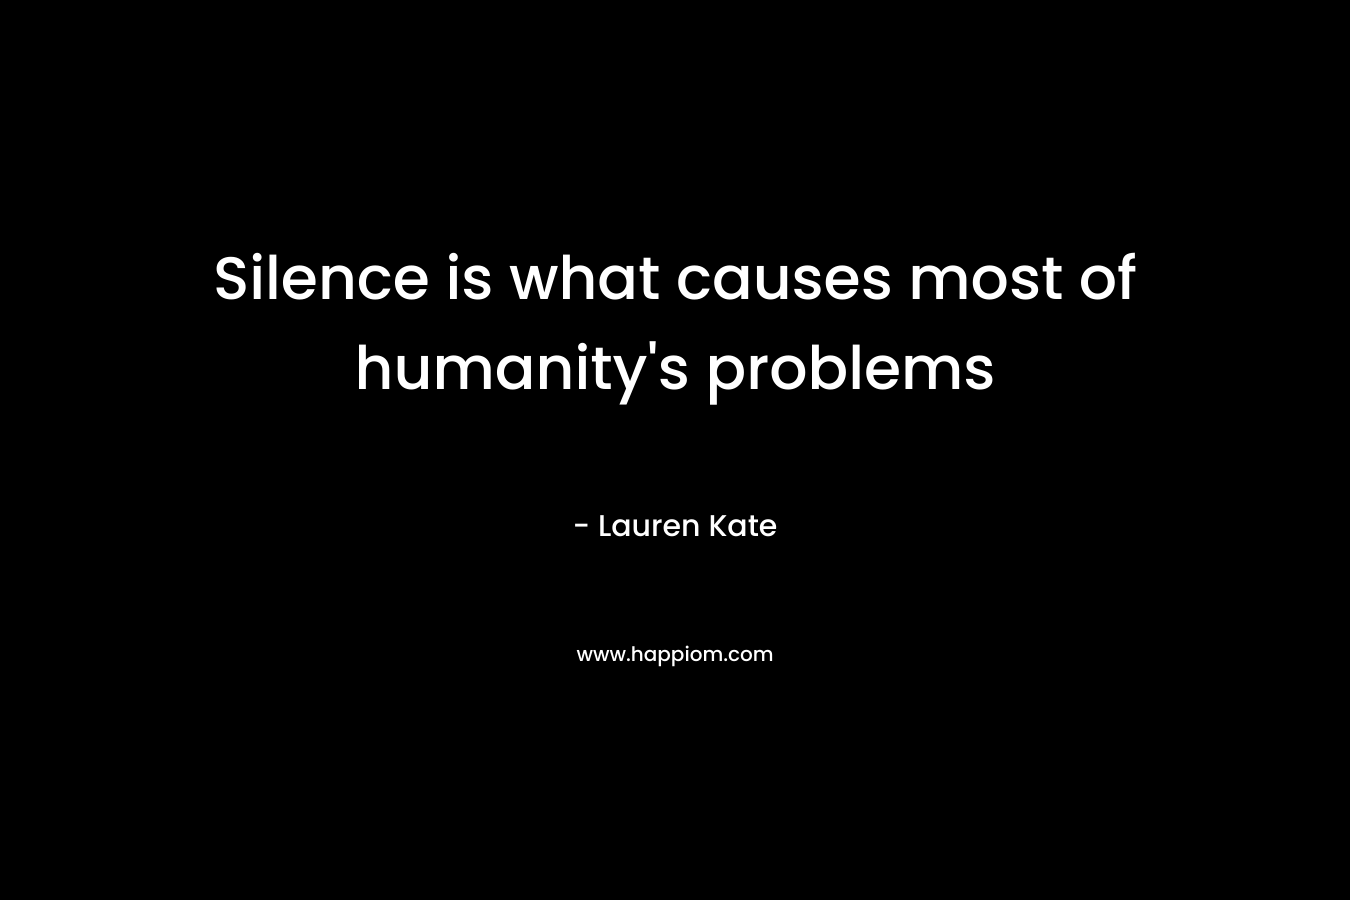 Silence is what causes most of humanity's problems